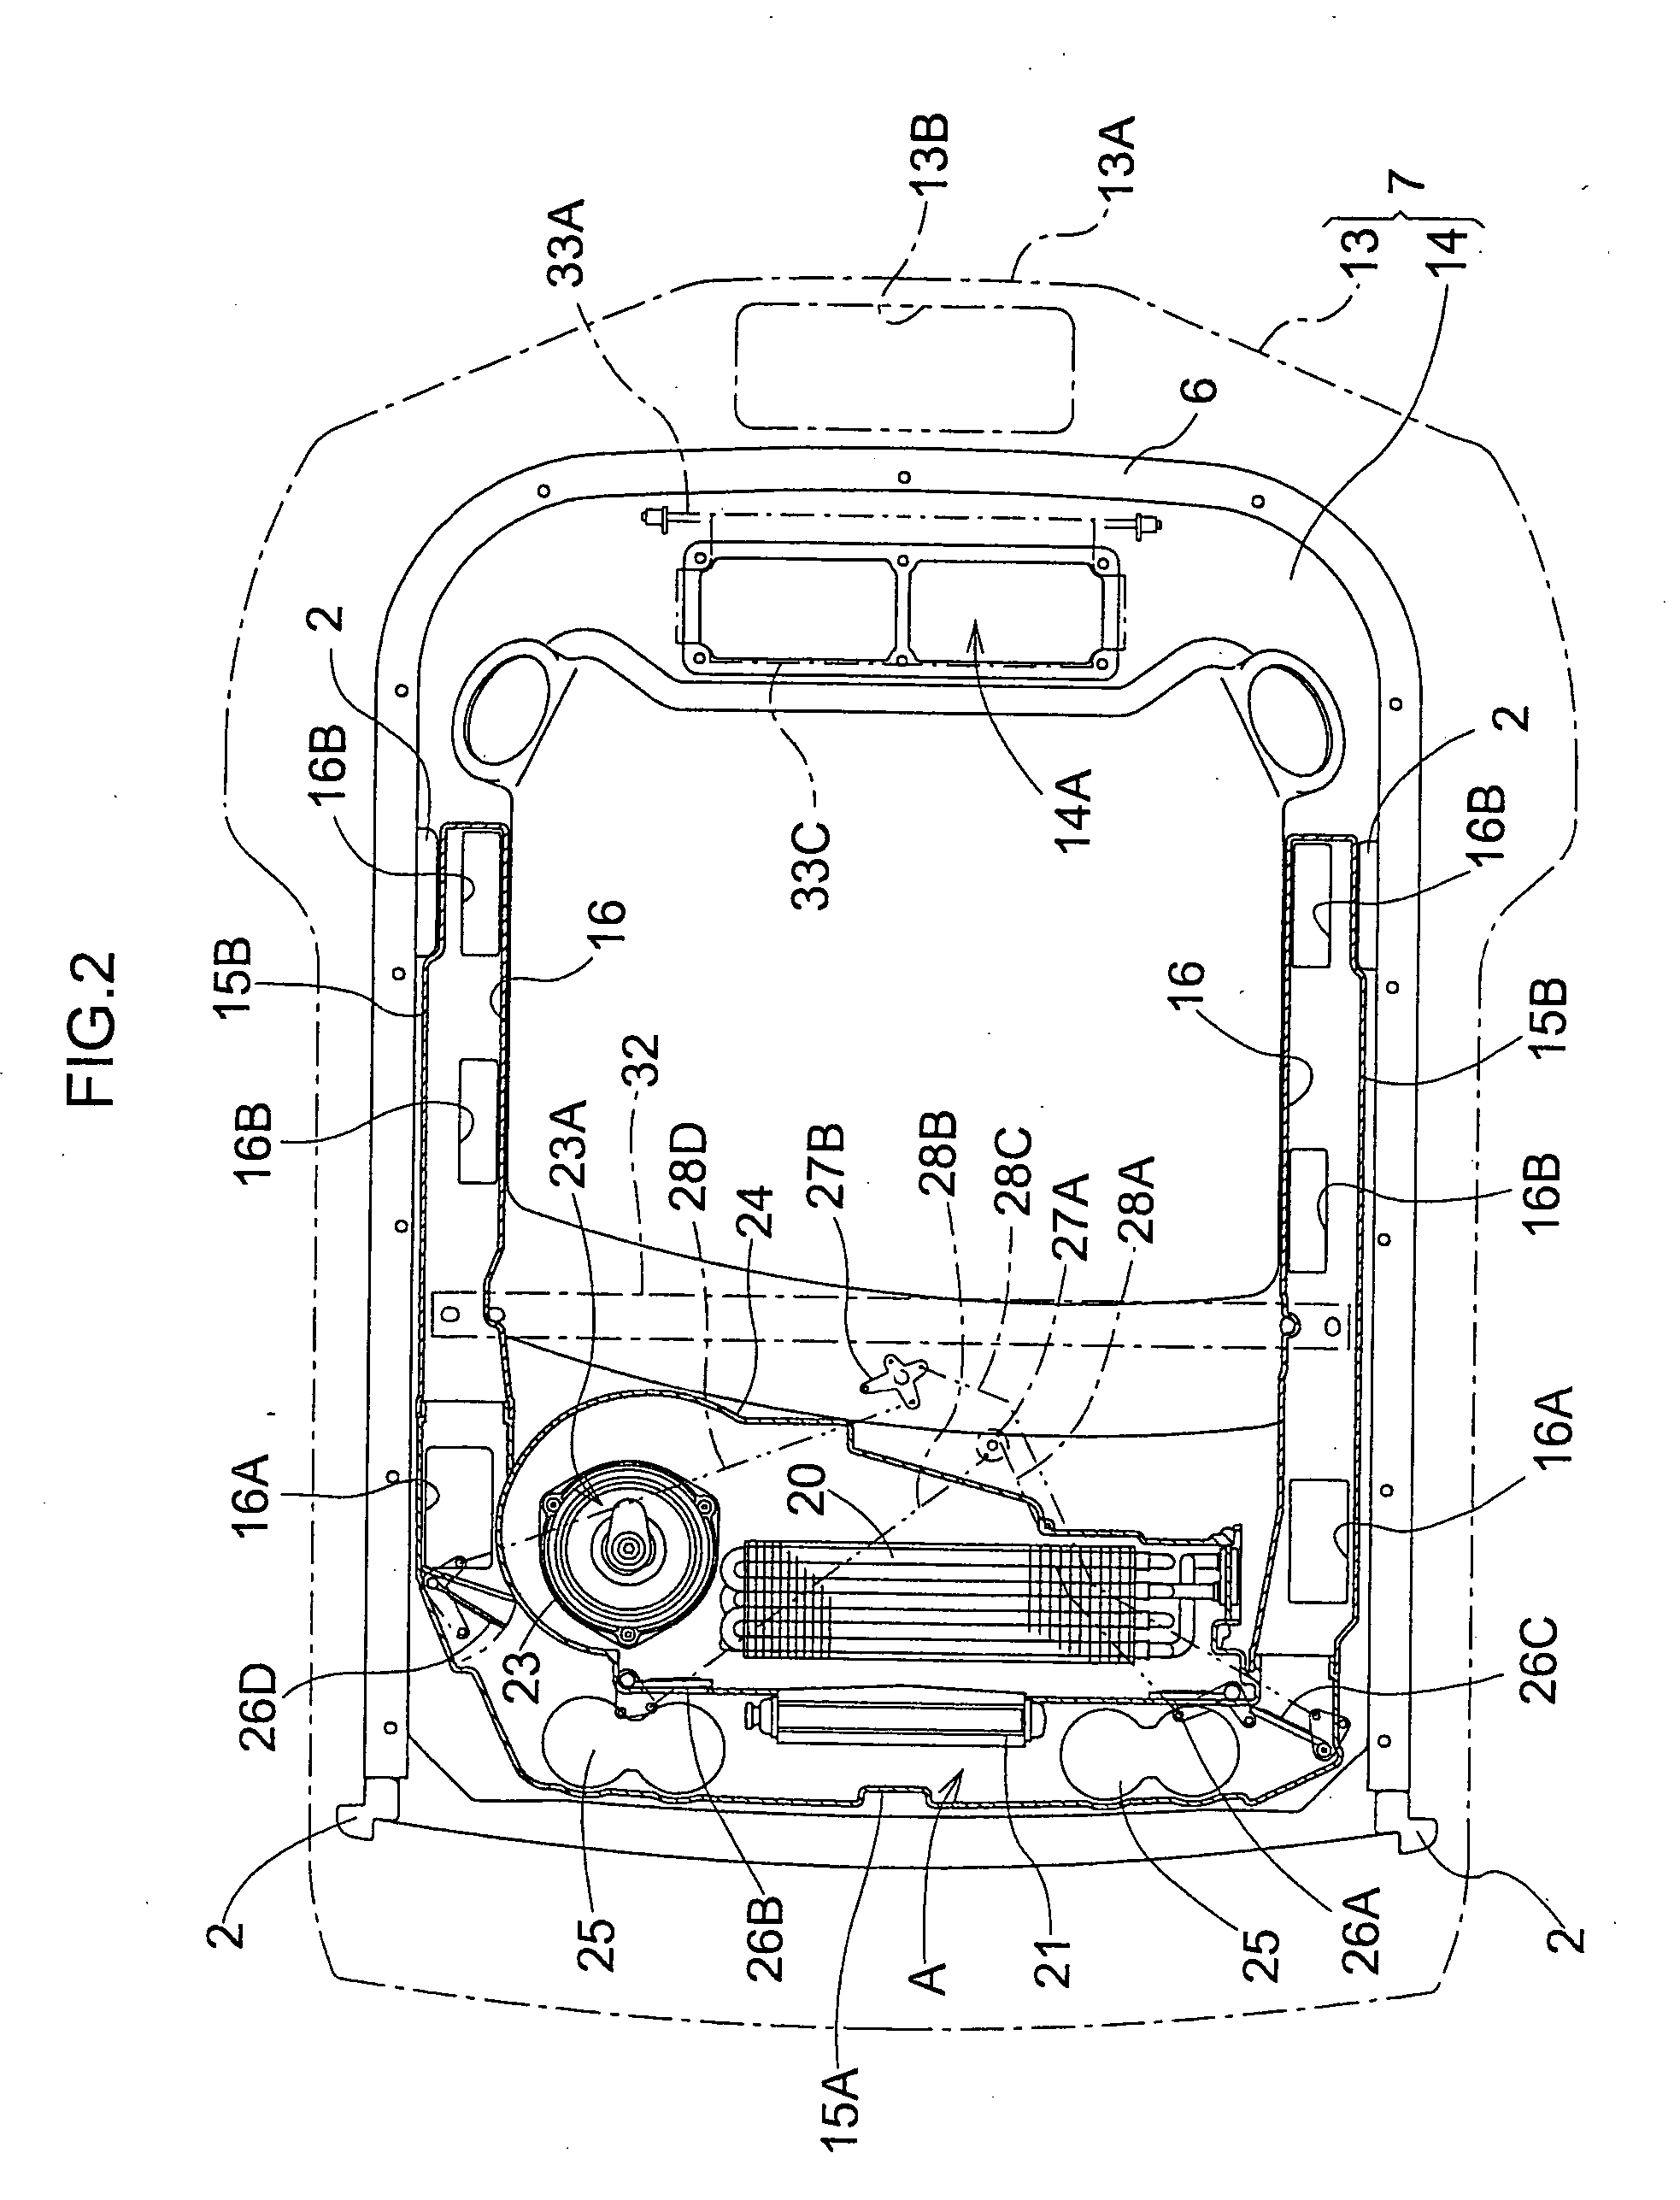 Work-vehicle cabin having air-conditioning unit